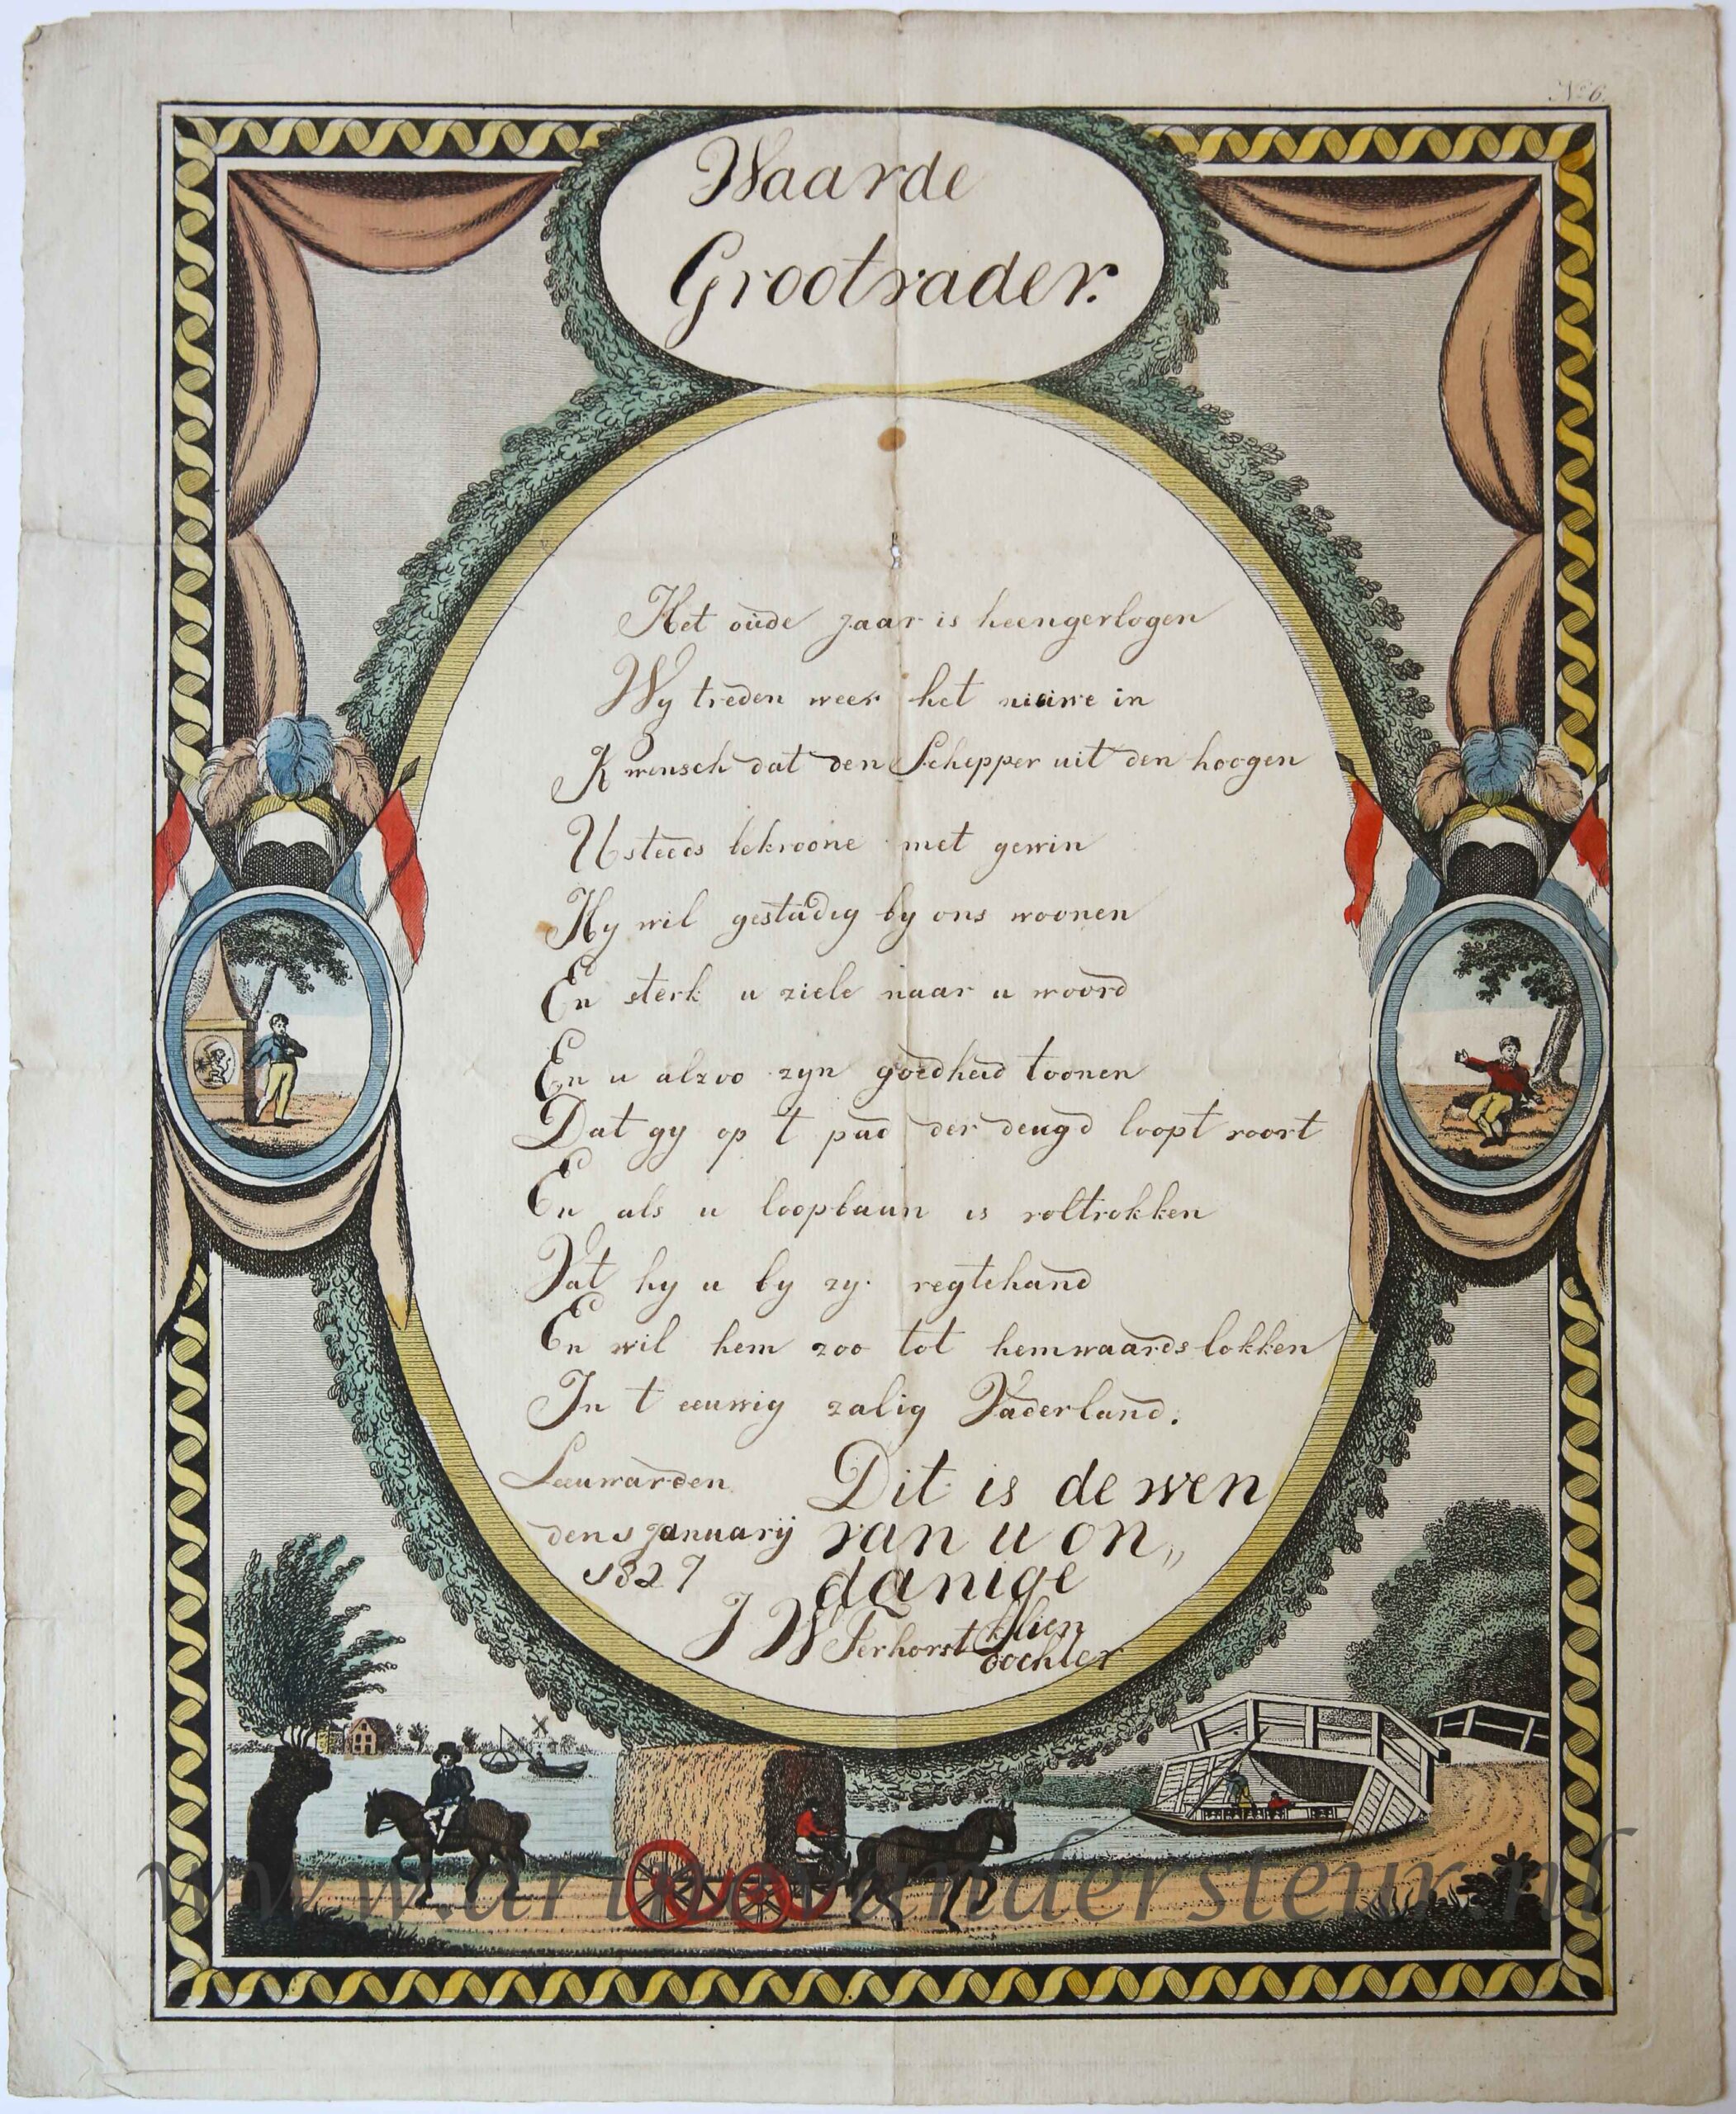 [Nieuwjaarswensch / New Year Wishes, 1827] J.W. Ferhorst. Hand colored wishcard with a view on a canal, dated 1827, 1 p.